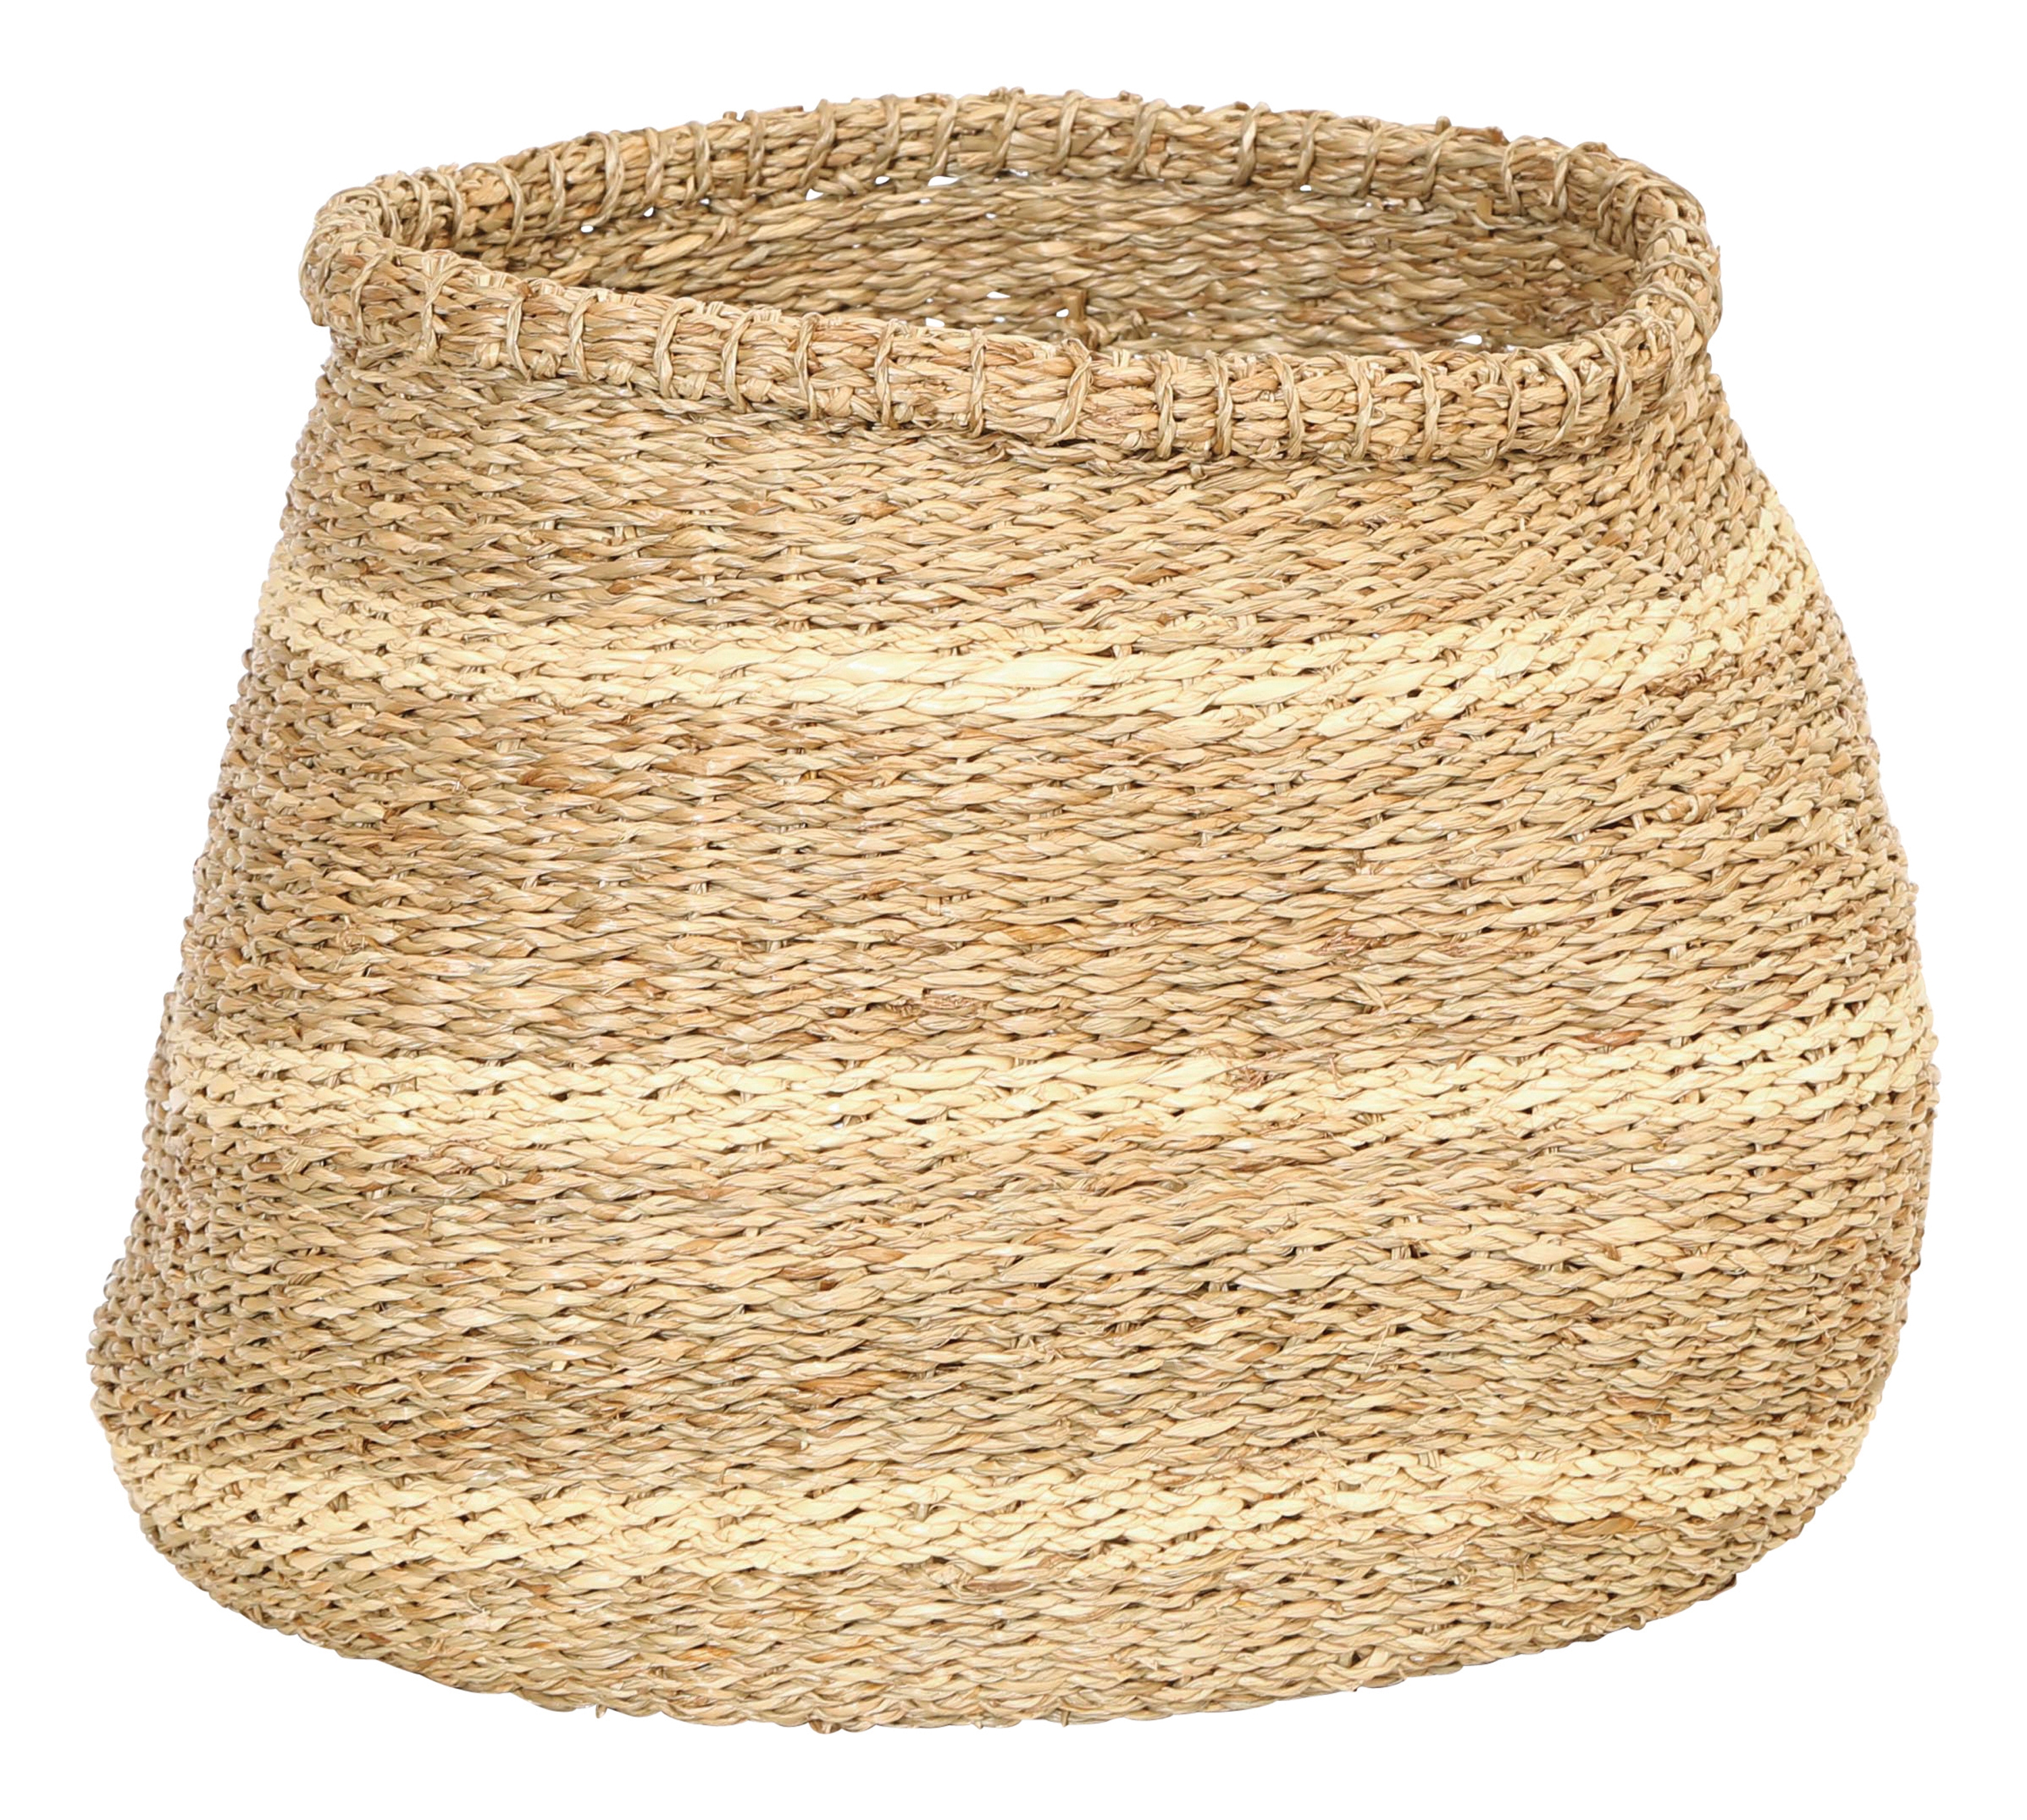 Handwoven Seagrass Basket with Stripes - Image 0